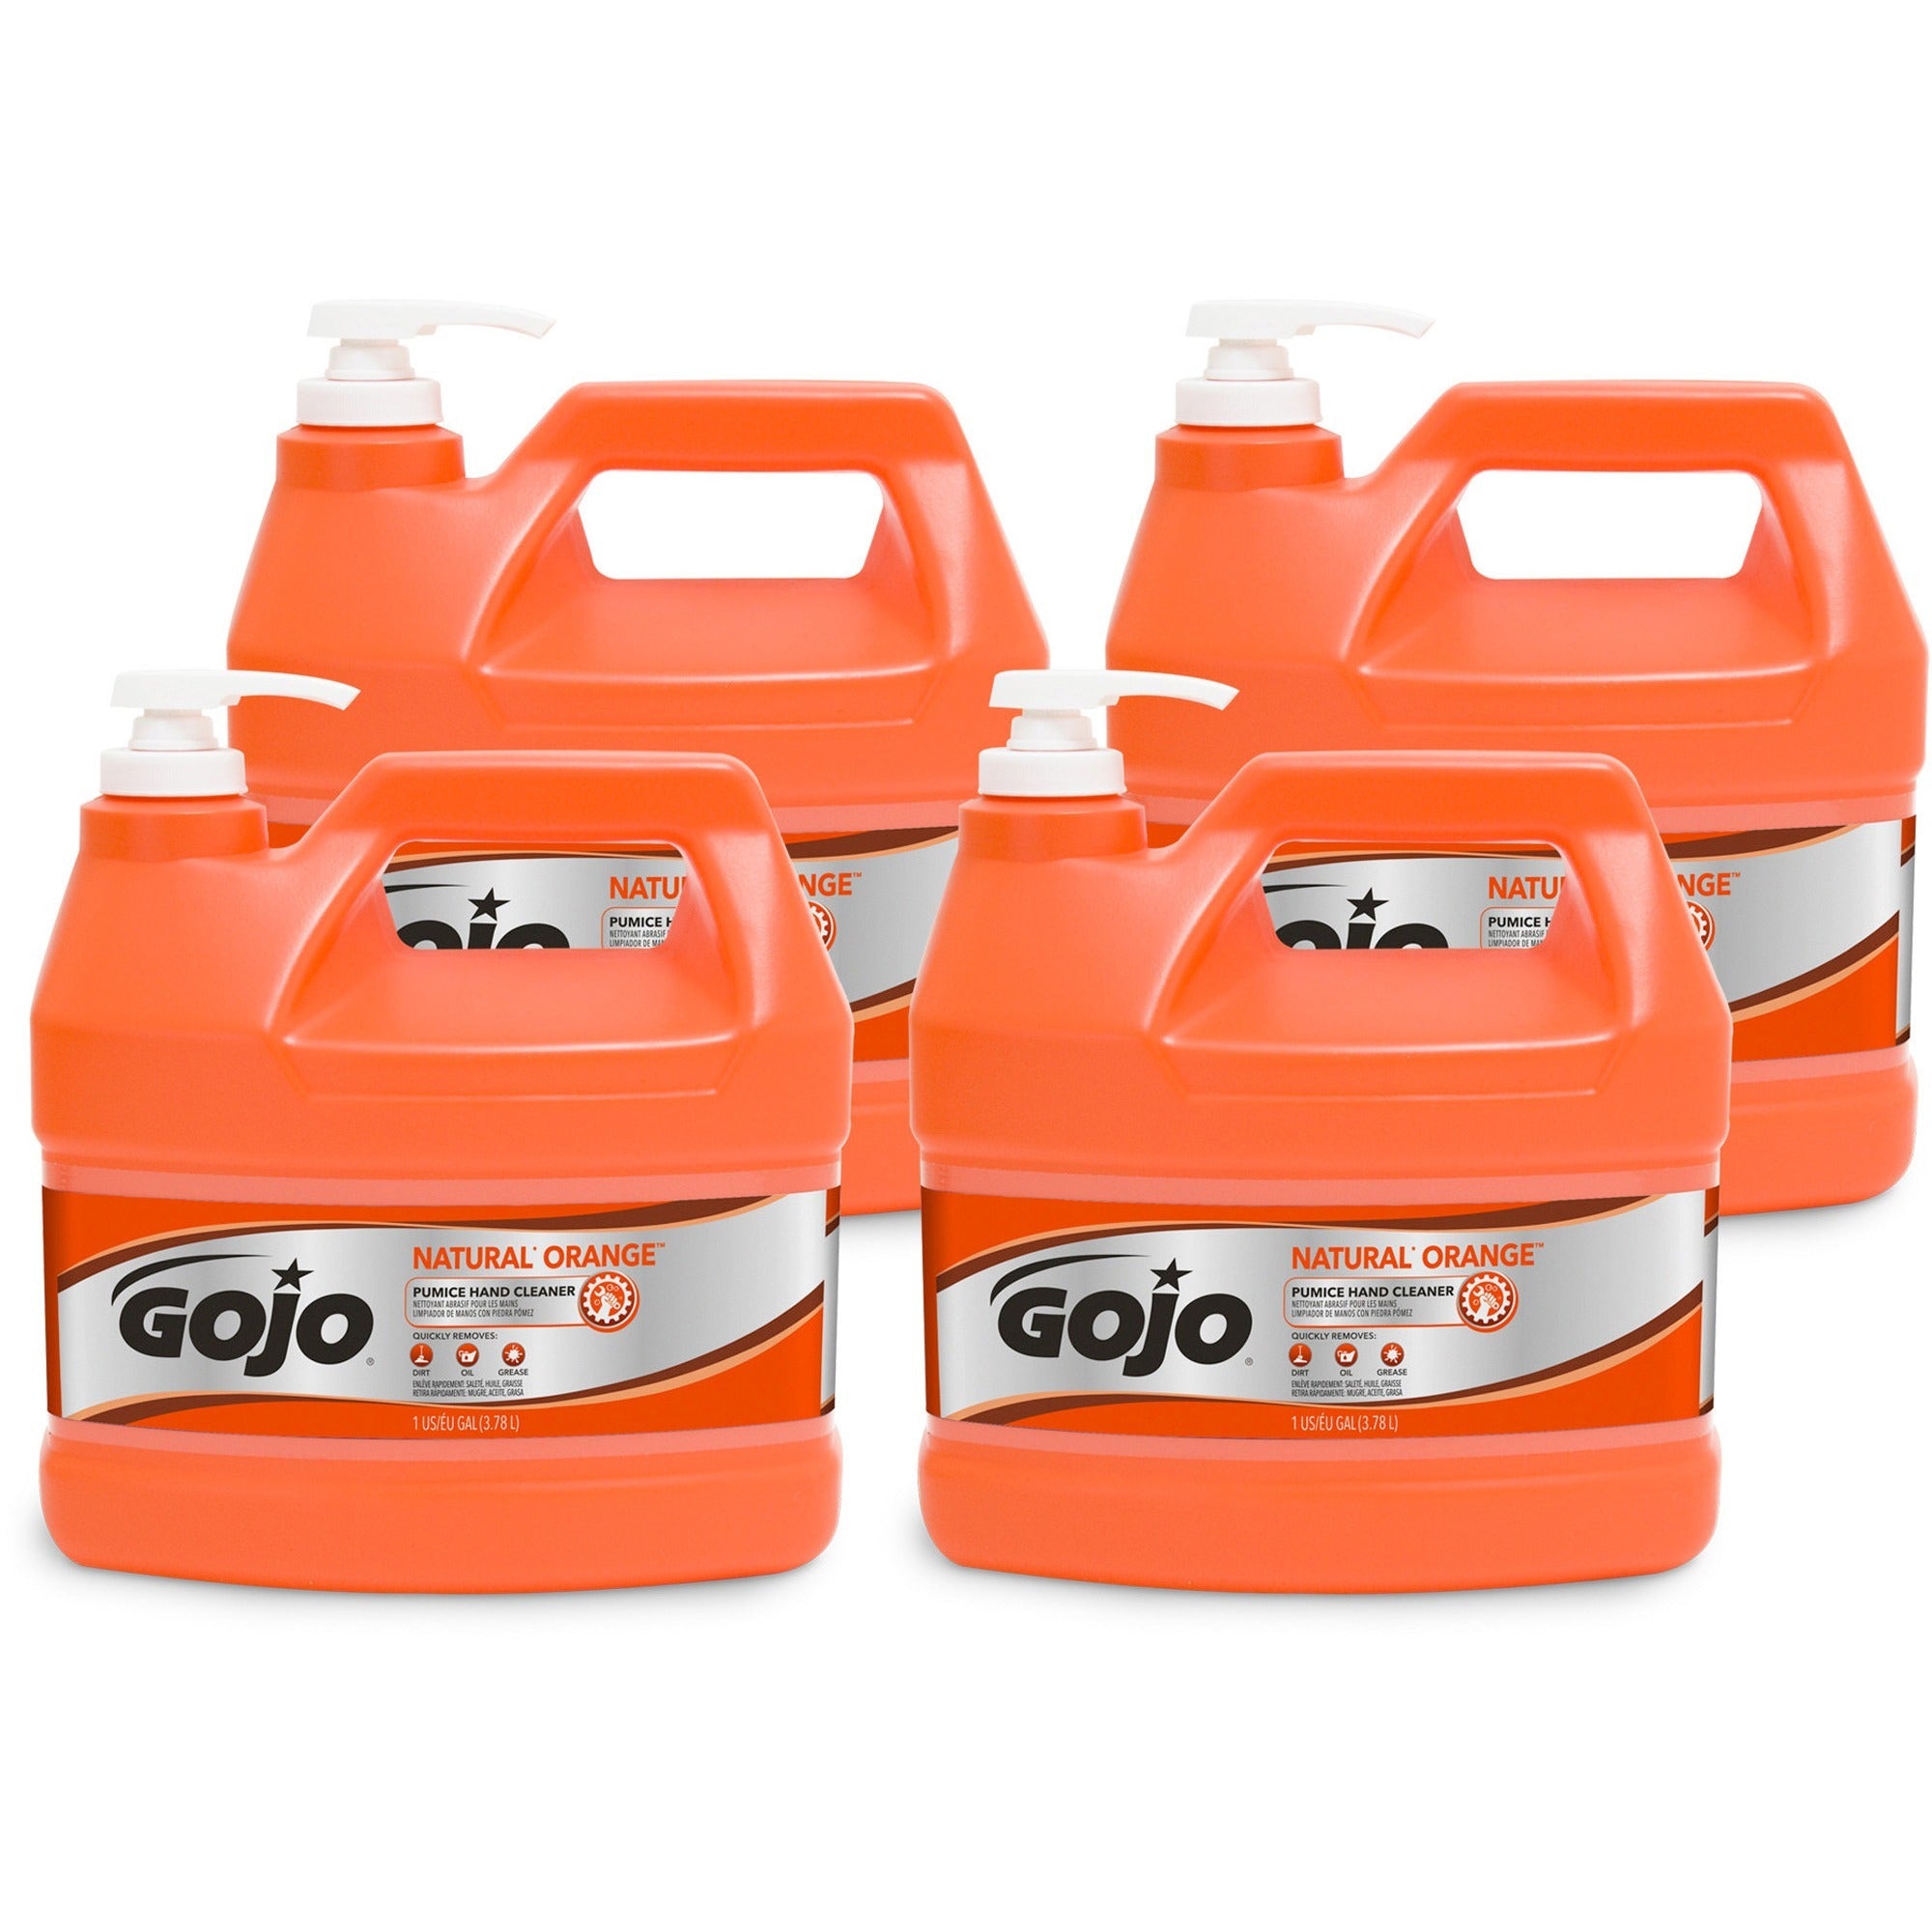 gojo-natural-orange-pumice-hand-cleaner-fragrance-free-scentfor-1-gal-38-l-pump-bottle-dispenser-dirt-remover-oil-remover-grease-remover-hand-white-heavy-duty-fast-acting-4-carton_goj095504ct - 1